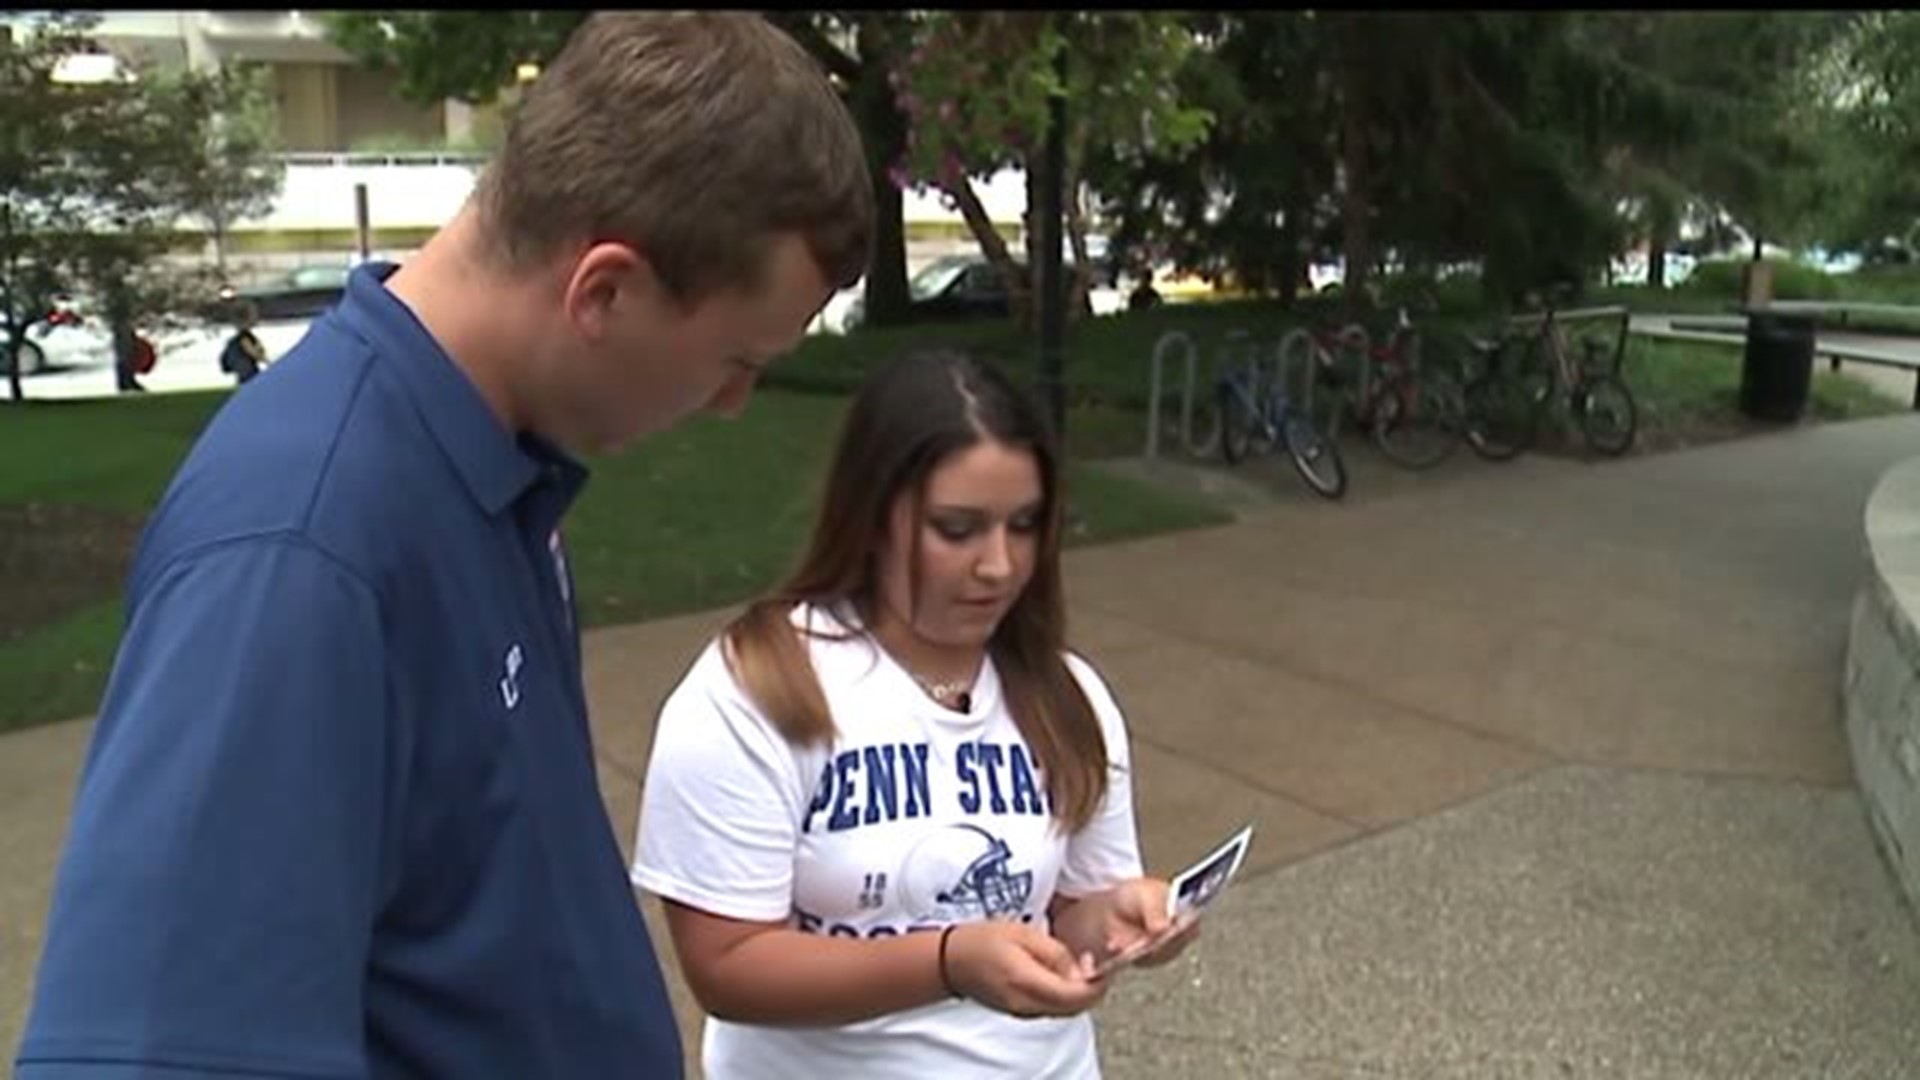 Pitt-Penn State rivalry comes between family and friends